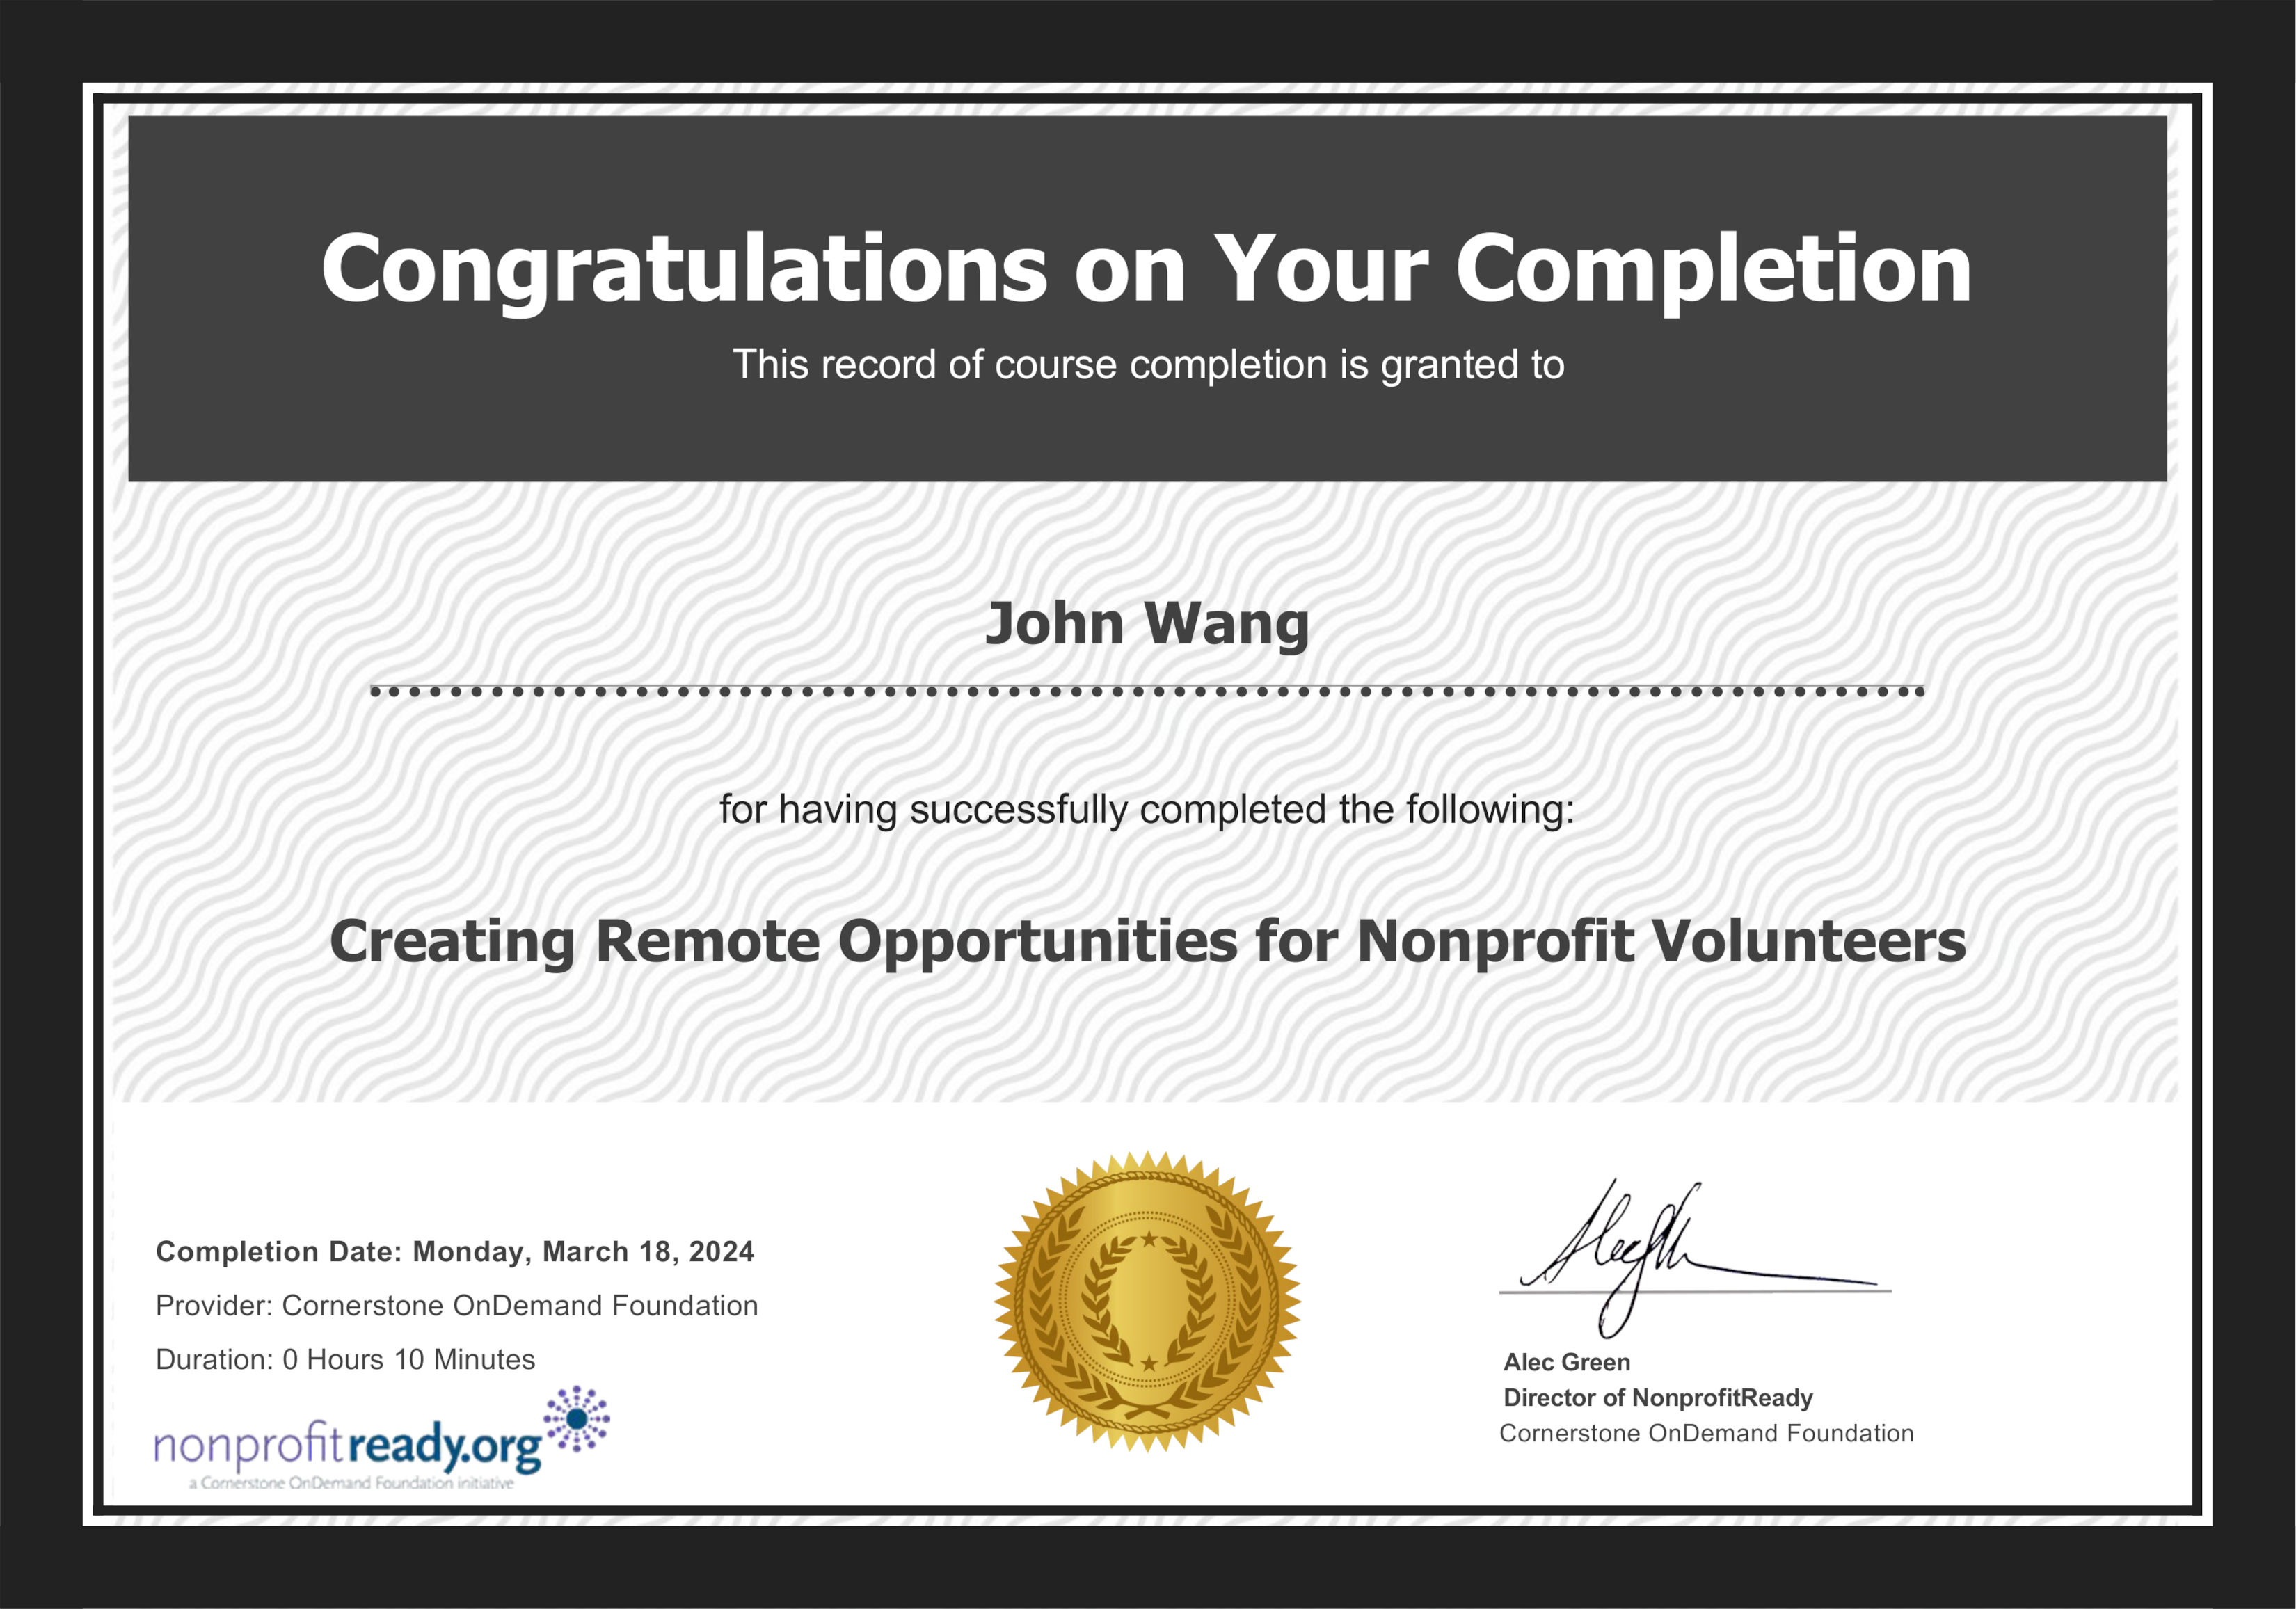 John's Creating Remote Opportunities for Nonprofit Volunteers from Cornerstone OnDemand Foundation